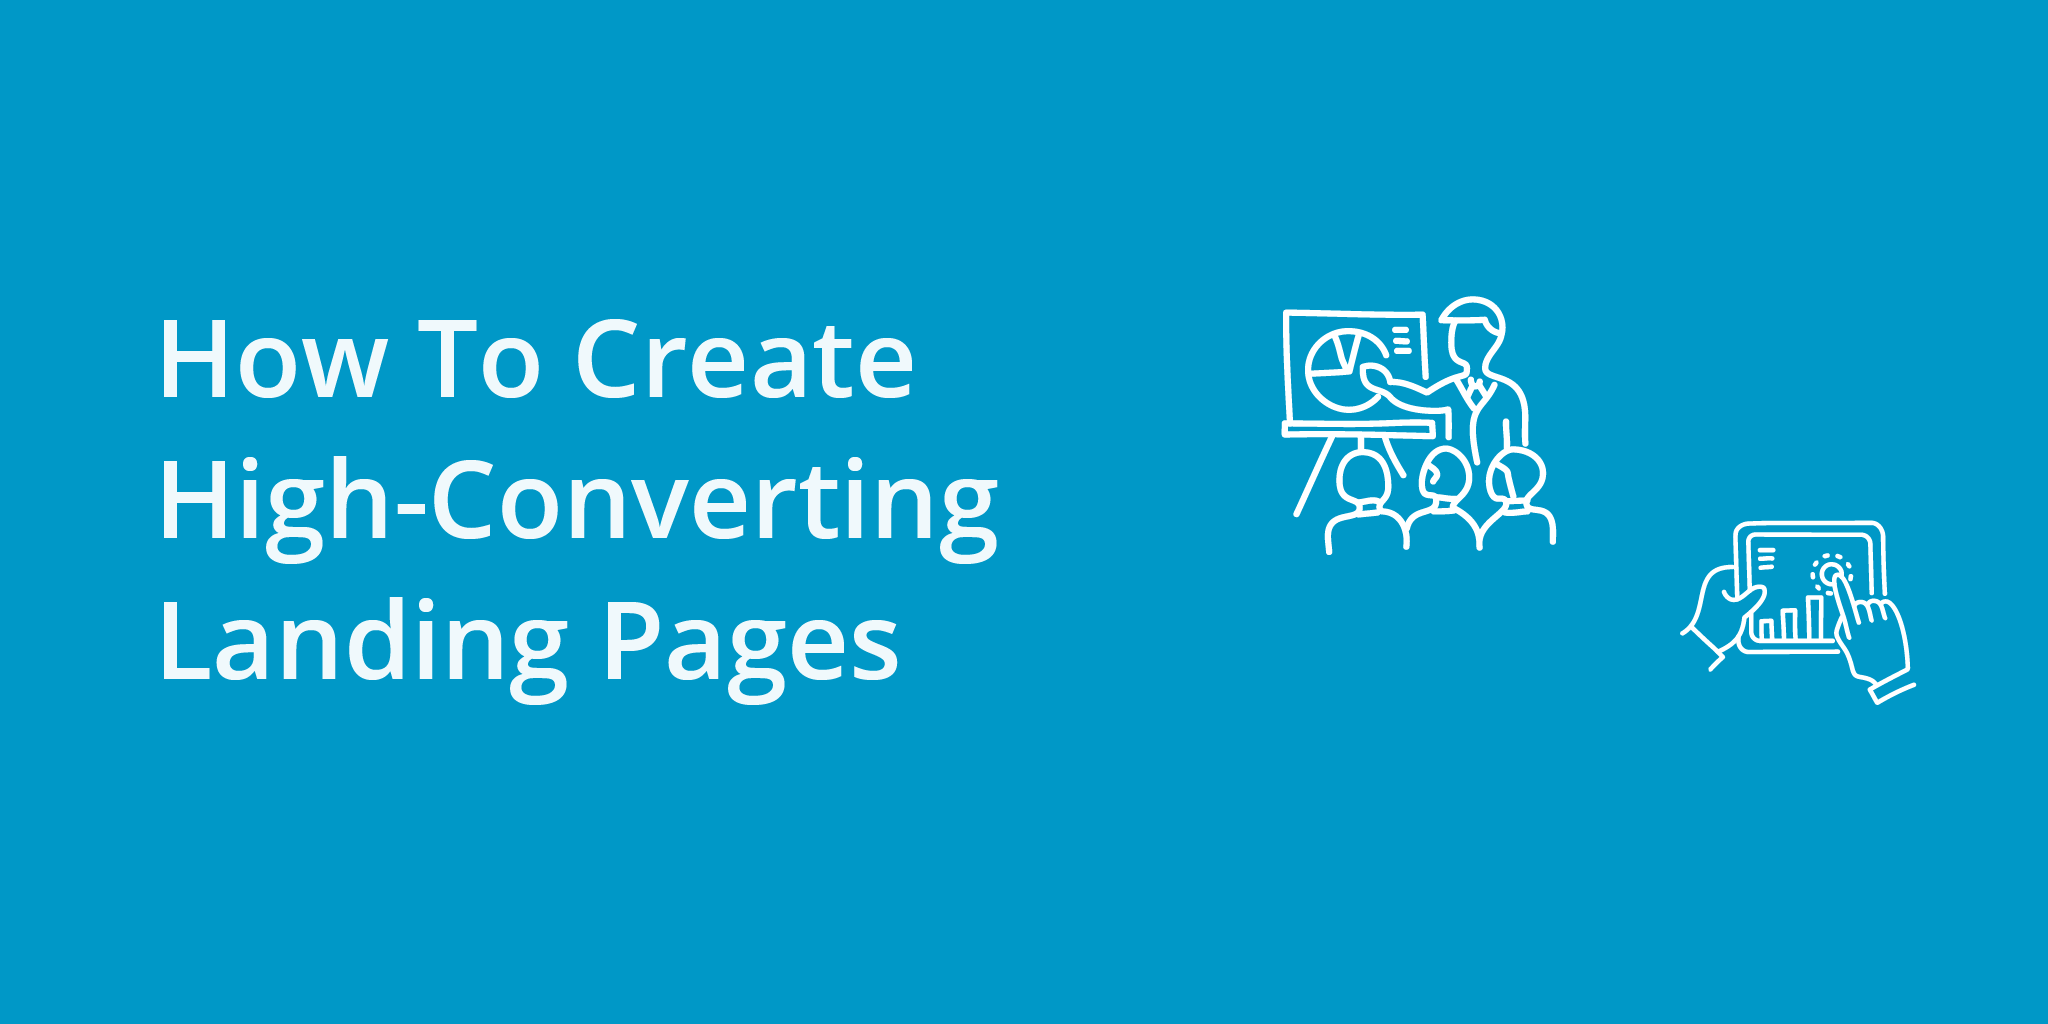 How To Create High-Converting Landing Pages | Telephones for business